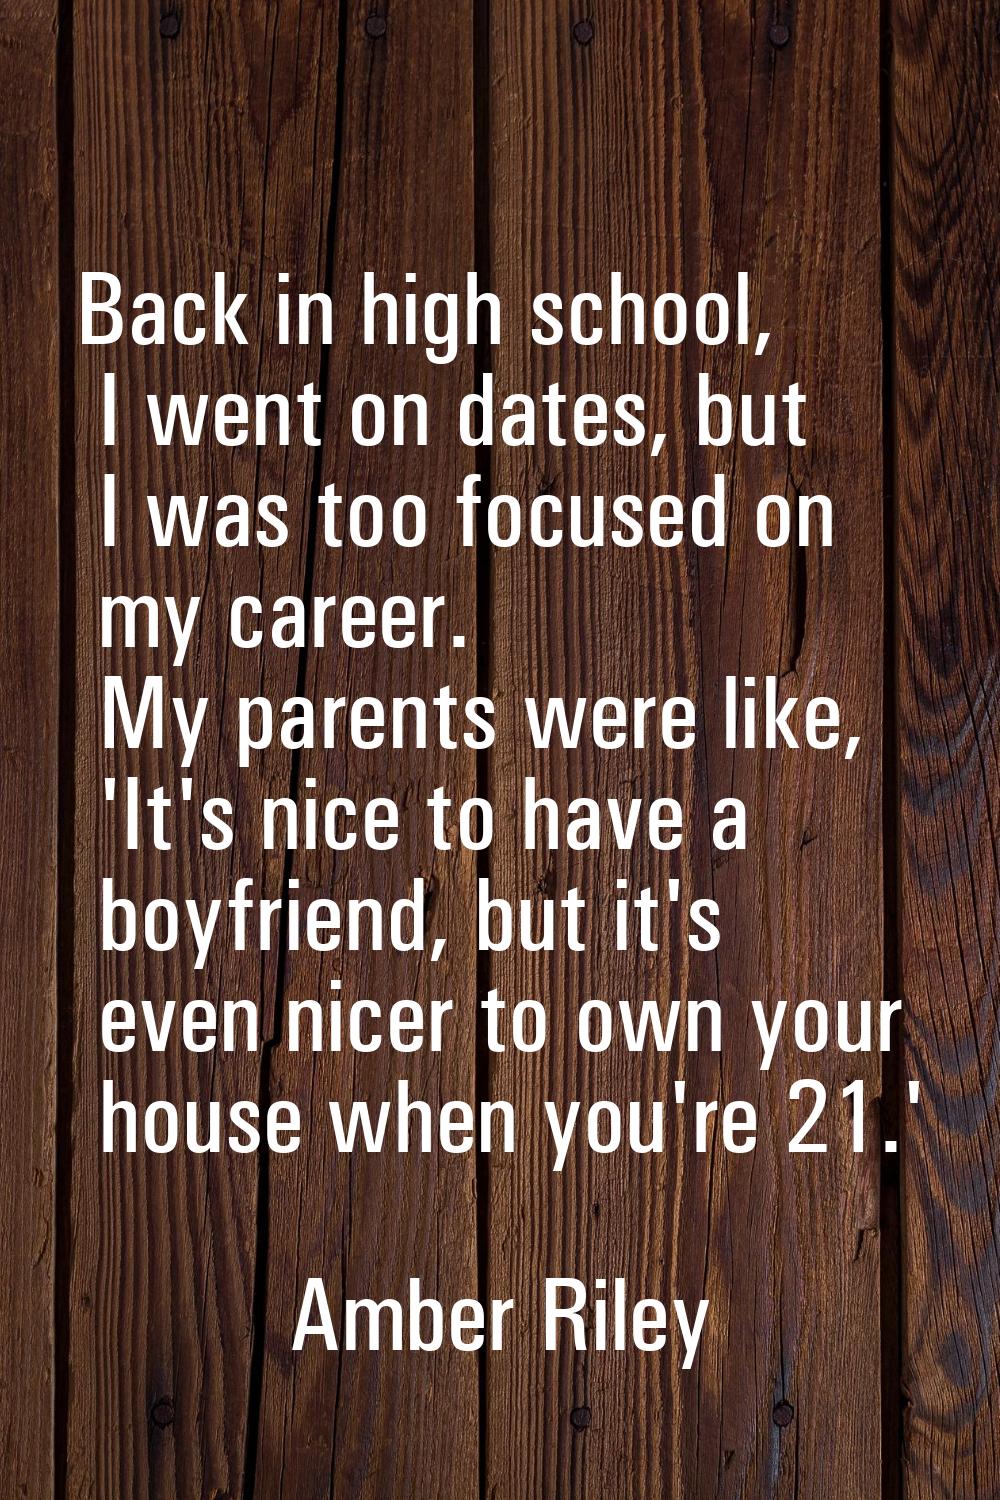 Back in high school, I went on dates, but I was too focused on my career. My parents were like, 'It